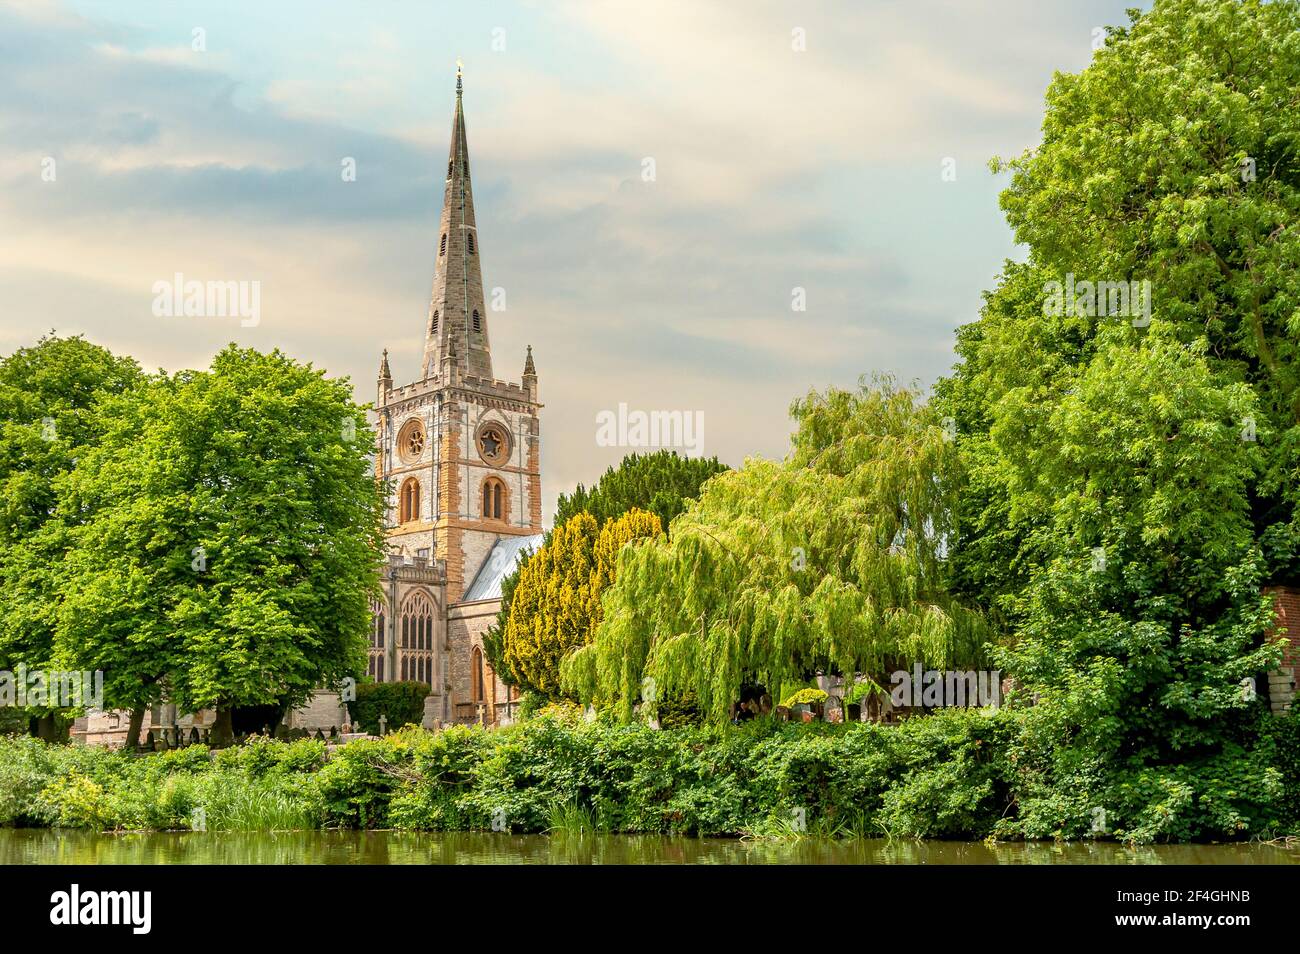 The Church of the Holy and Undivided Trinity, Stratford-upon-Avon, Warwickshire, England Stock Photo